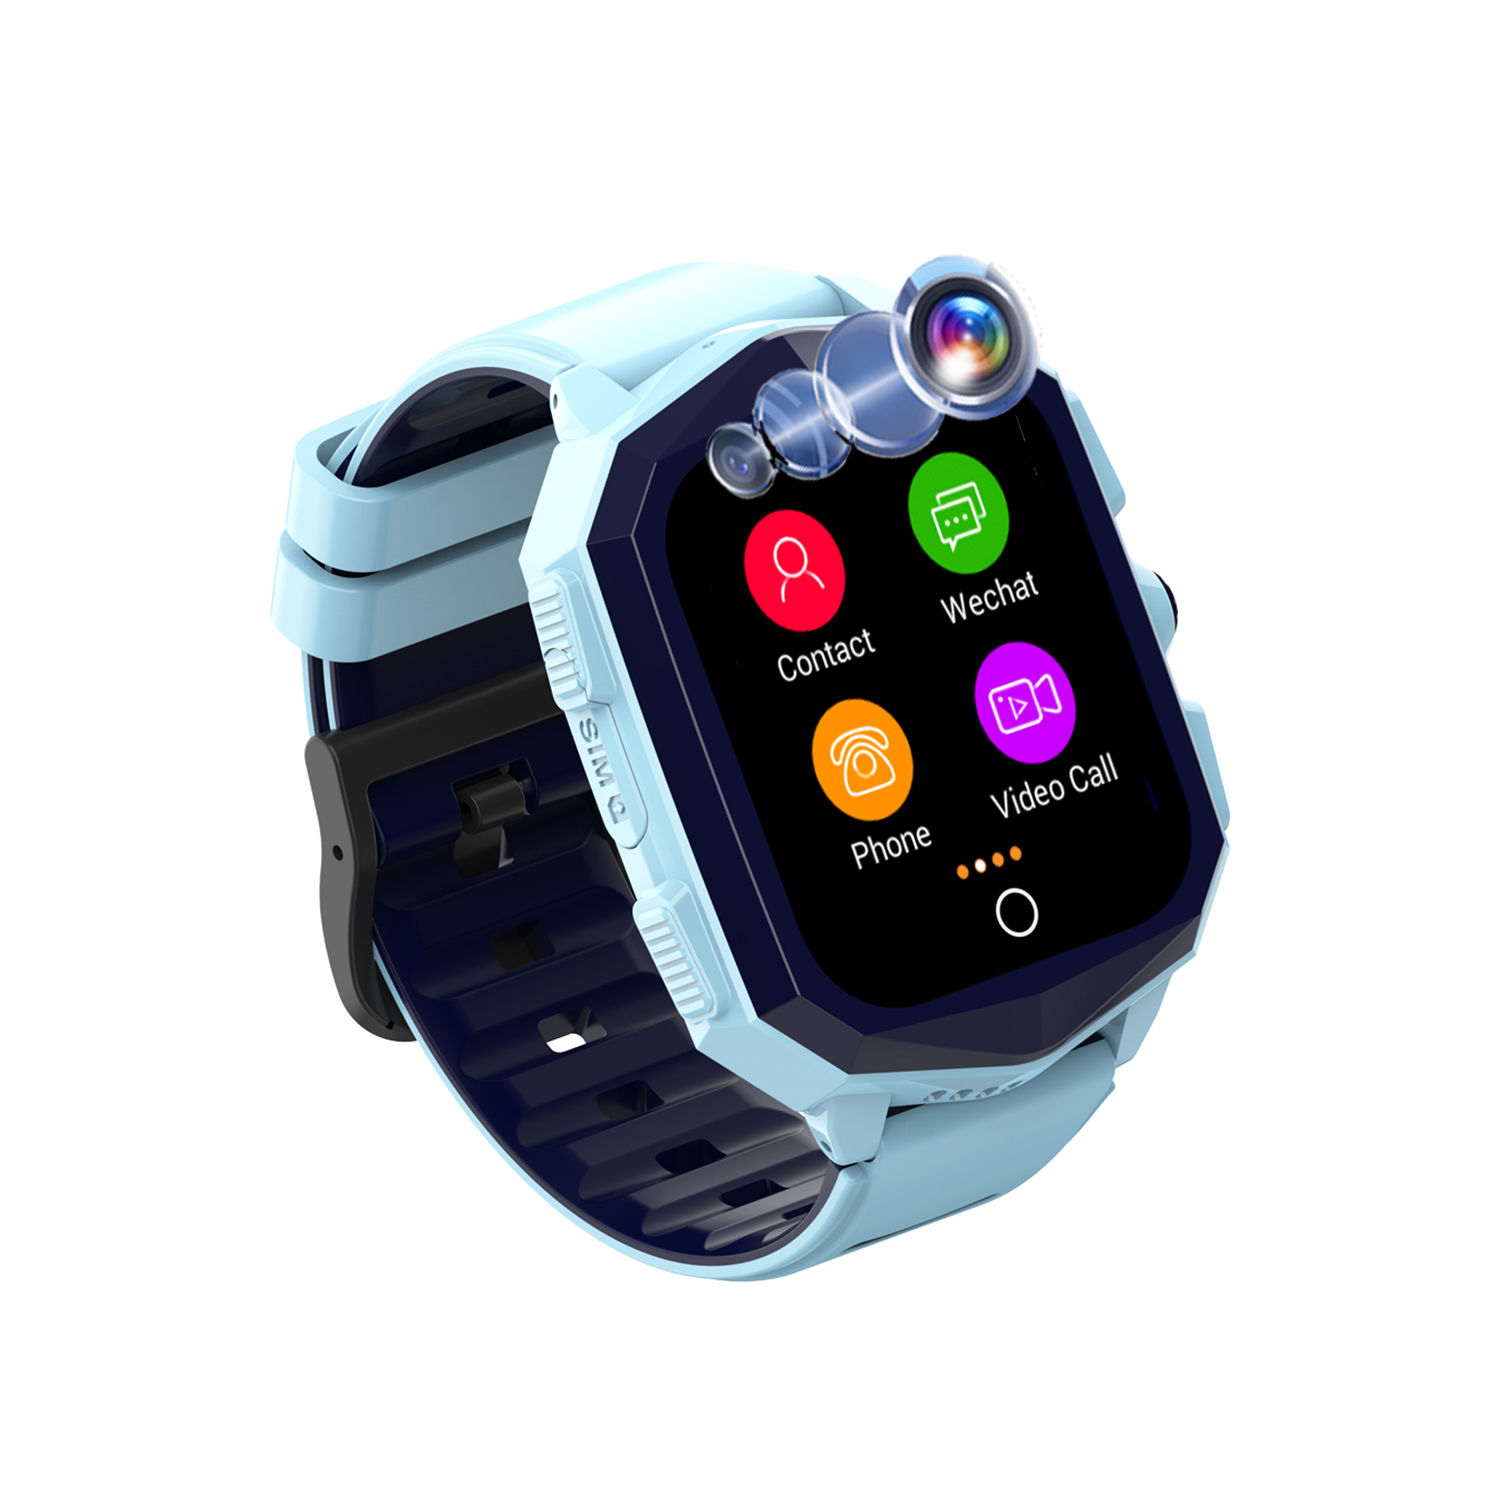 IP67 waterproof 4G promotion Gift GPS watch with Remote Snapshot Y49